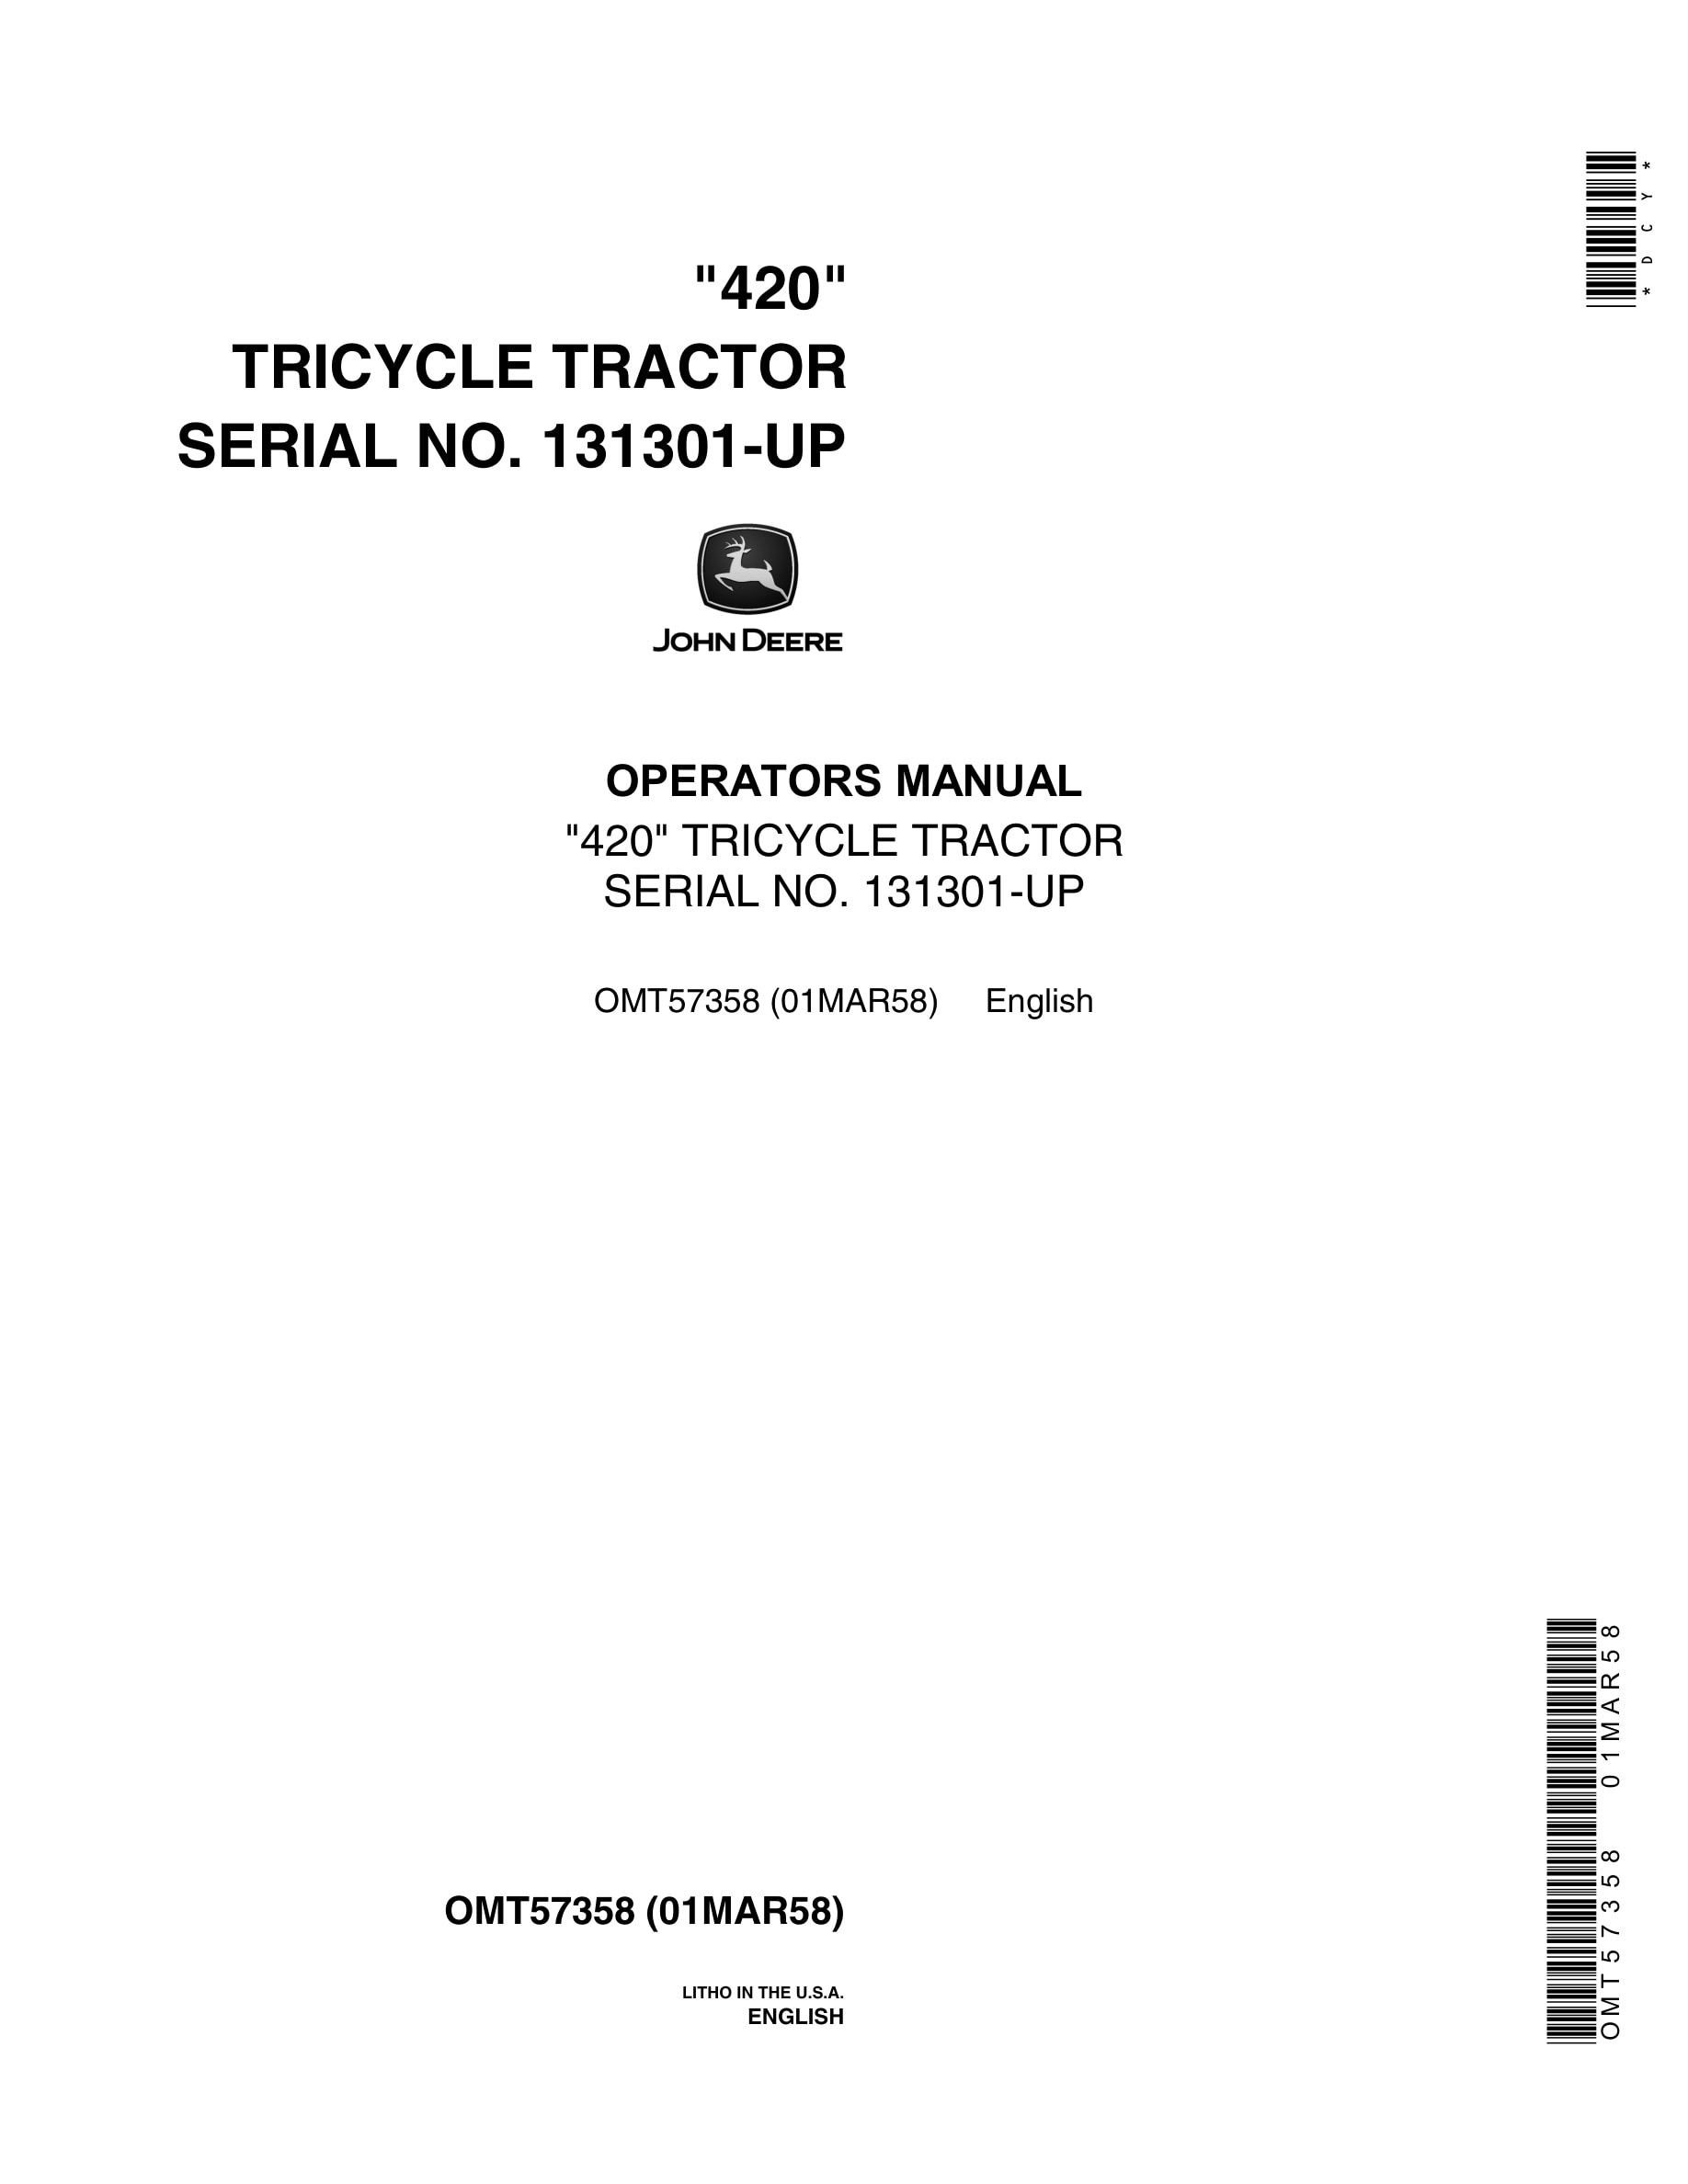 John Deere 420 Tricycle Tractor Operator Manual OMT5735-1